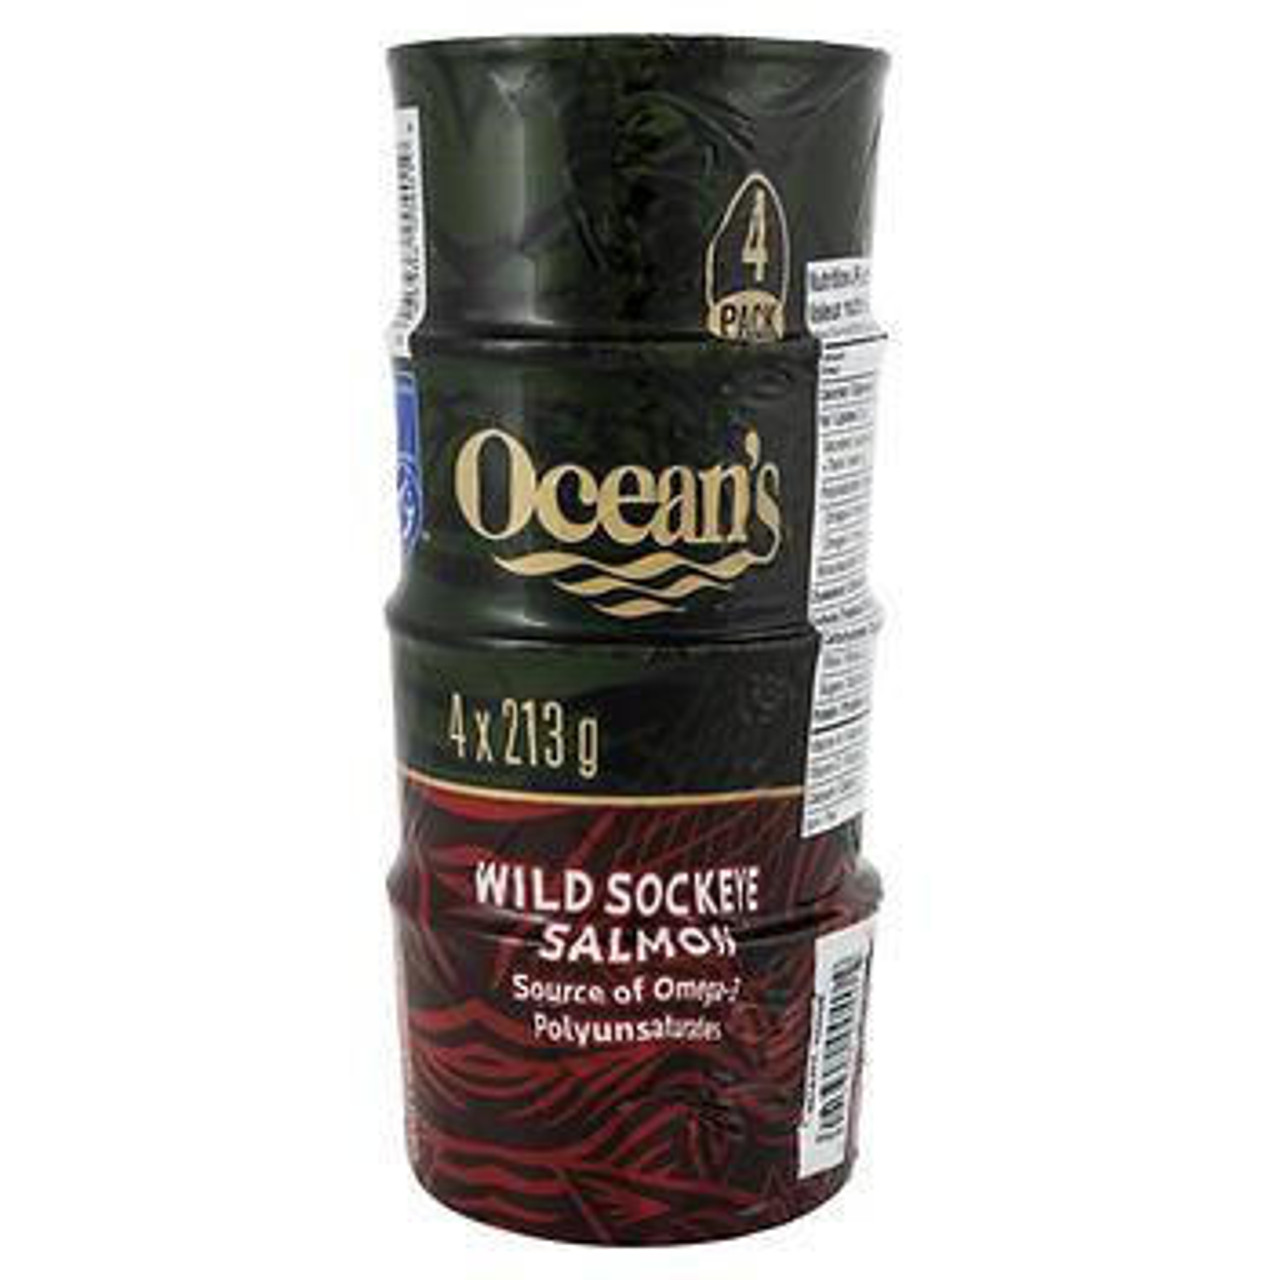 Ocean's Wild Sockeye Salmon, 4 x 213 g - Rich and Nutrient-Packed Seafood- Chicken Pieces